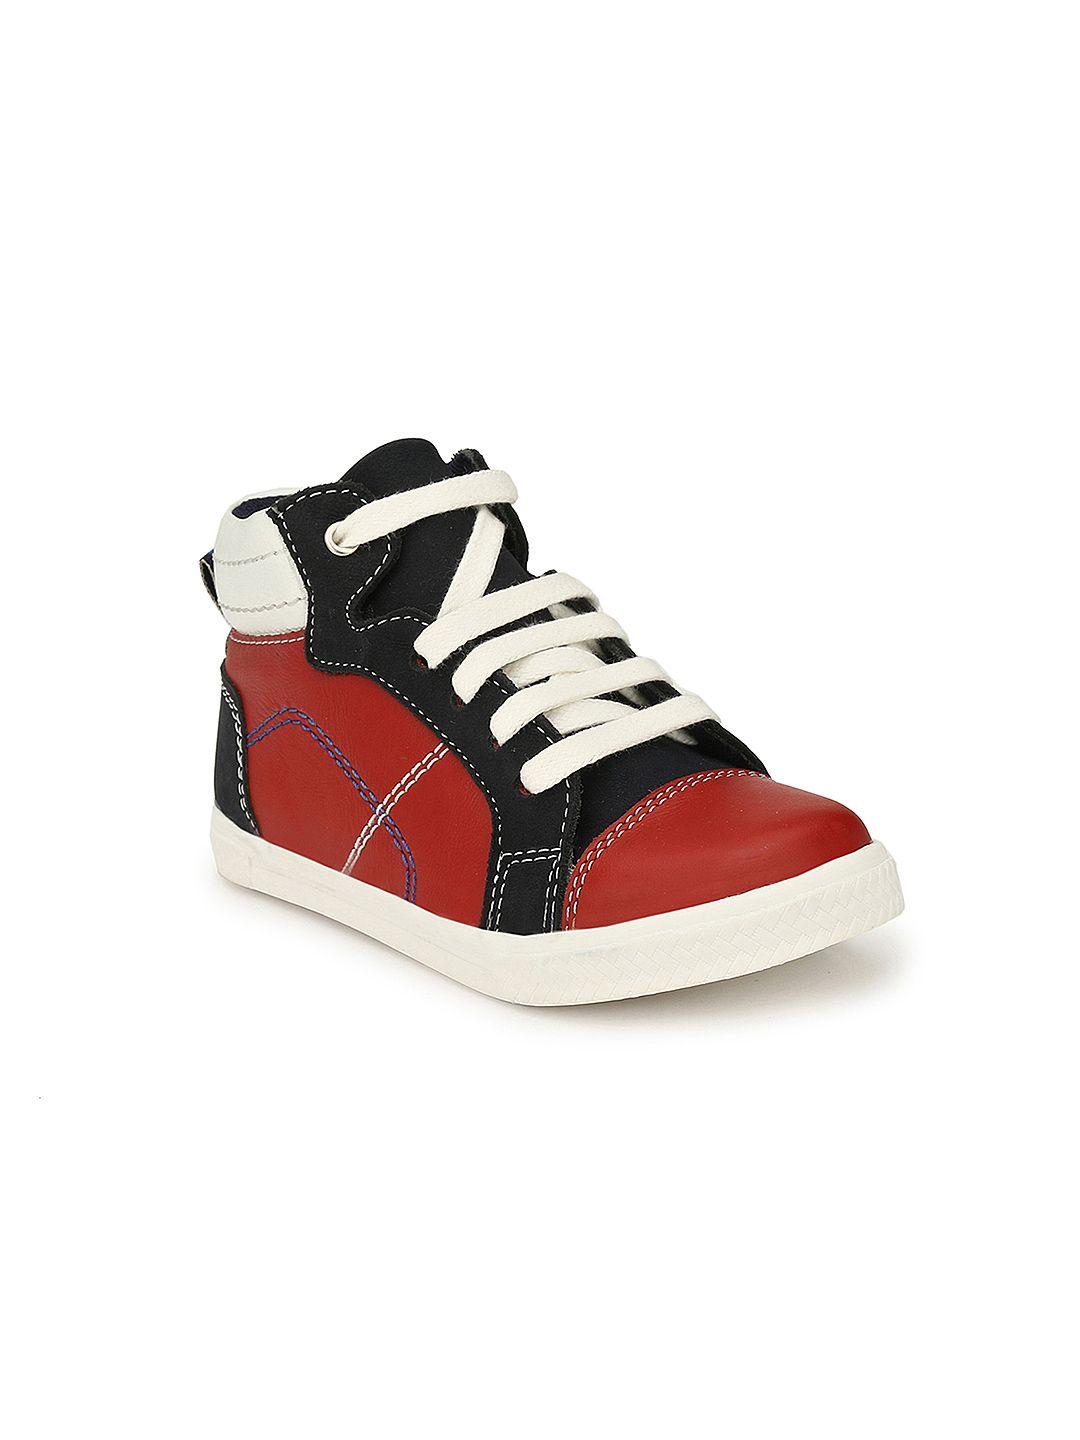 tuskey boys red & black colourblocked leather high-top sneakers